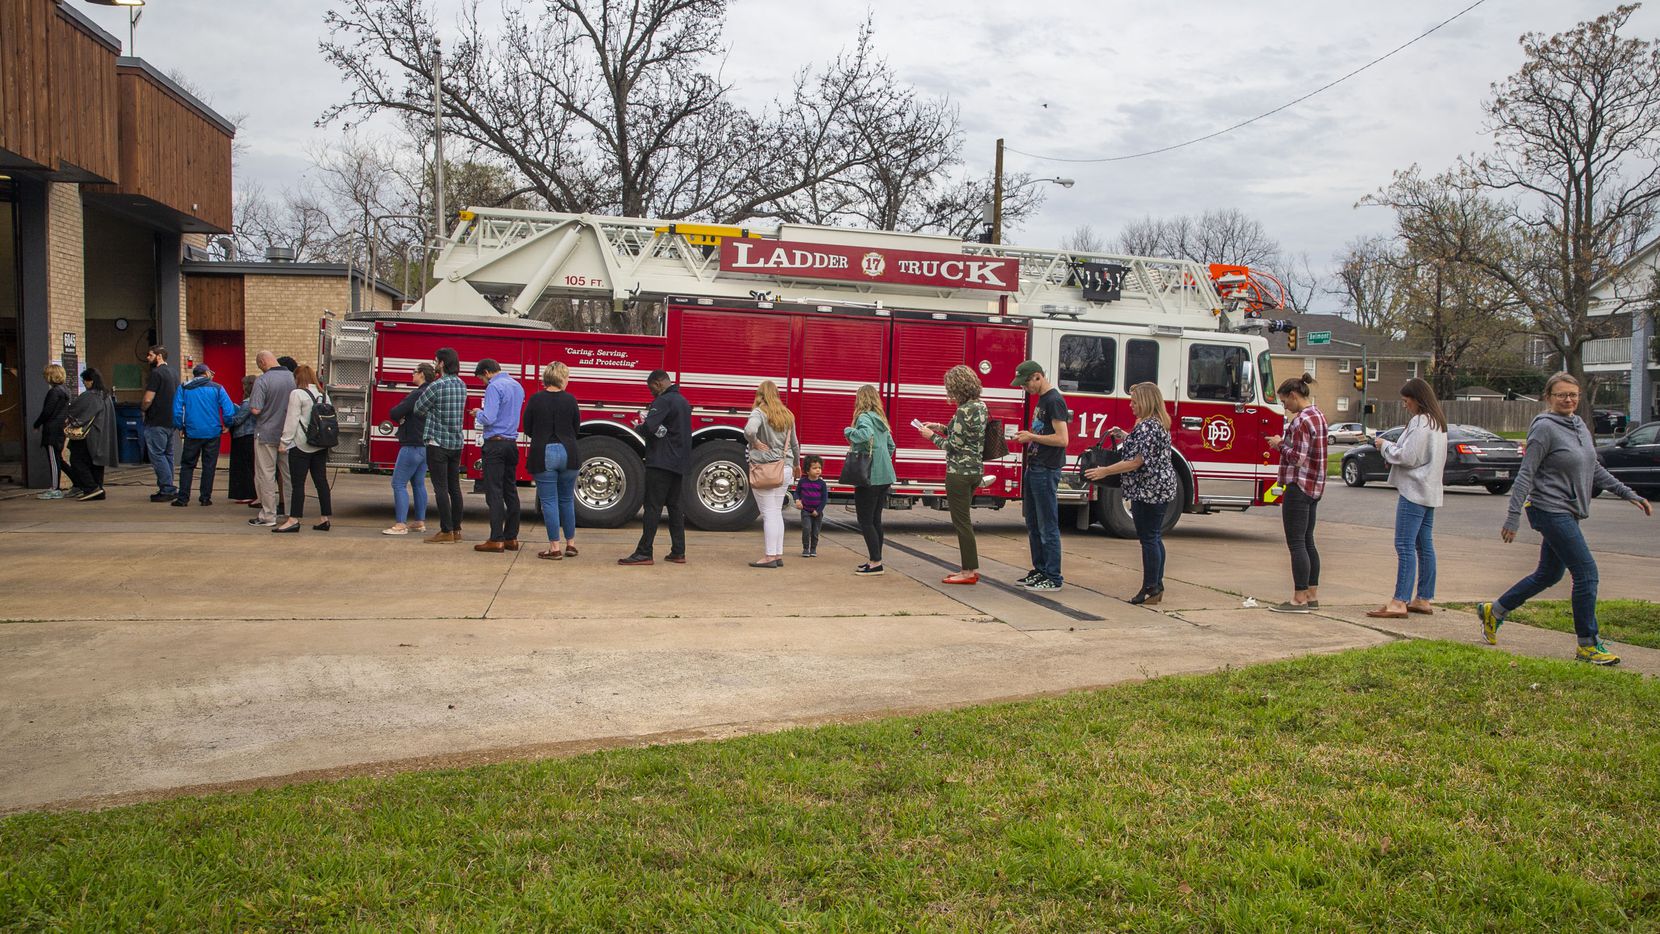 A long line of voters wait to cast their ballots in the primary election after 5 p.m. at Dallas Fire Station No. 17 in the Lakewood Heights neighborhood of Dallas on Tuesday, March 3, 2020.